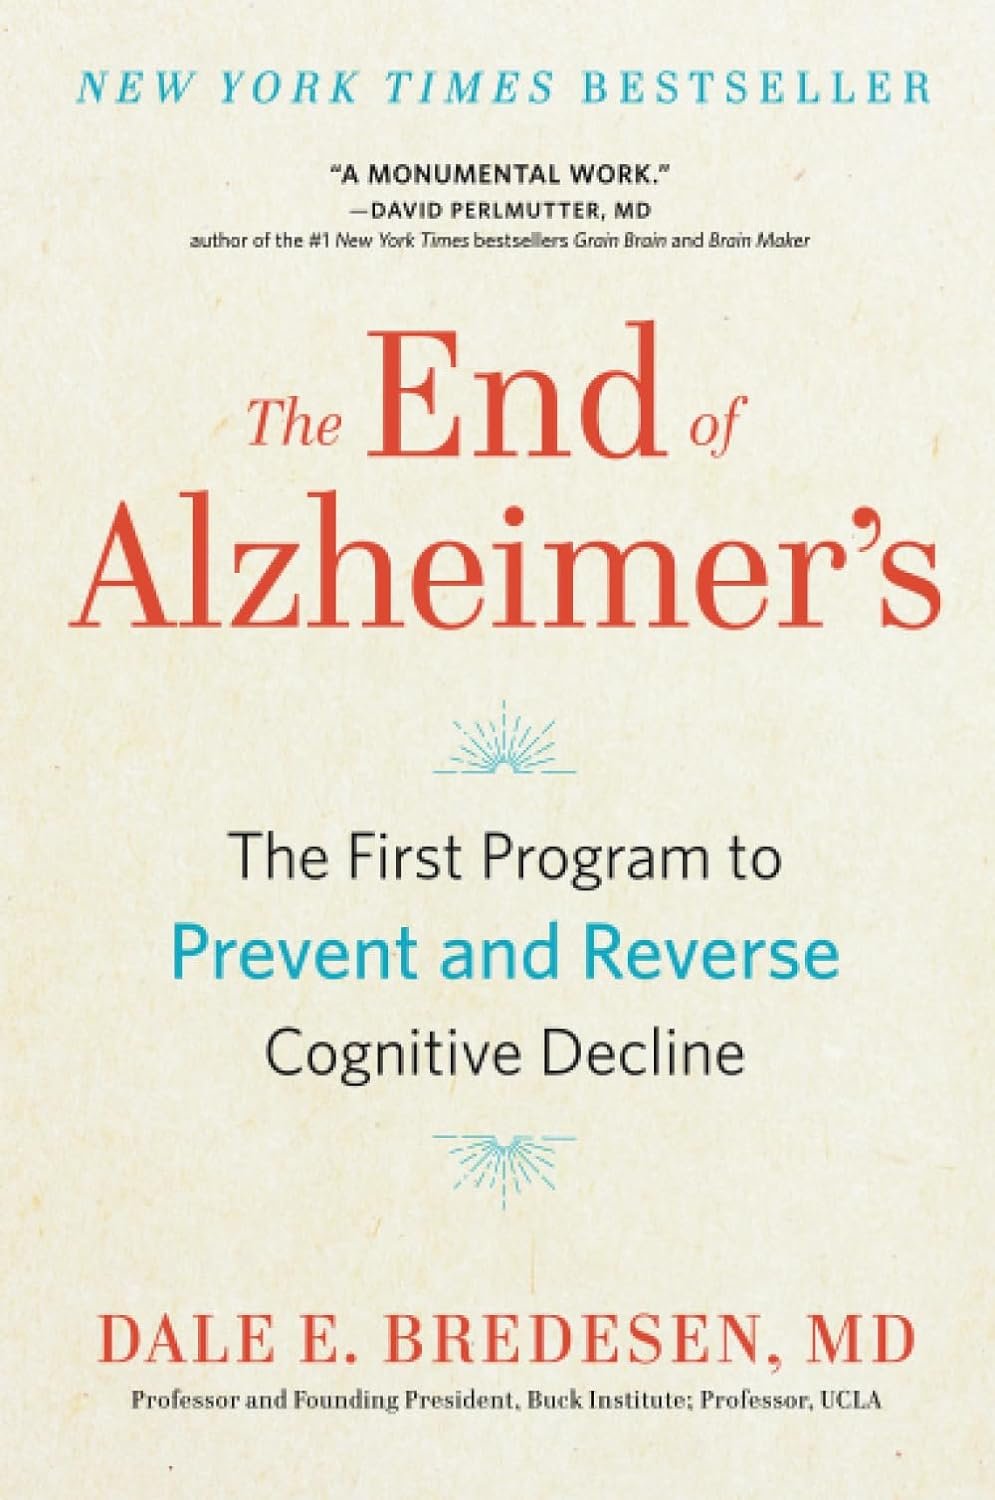 The End of Alzheimers